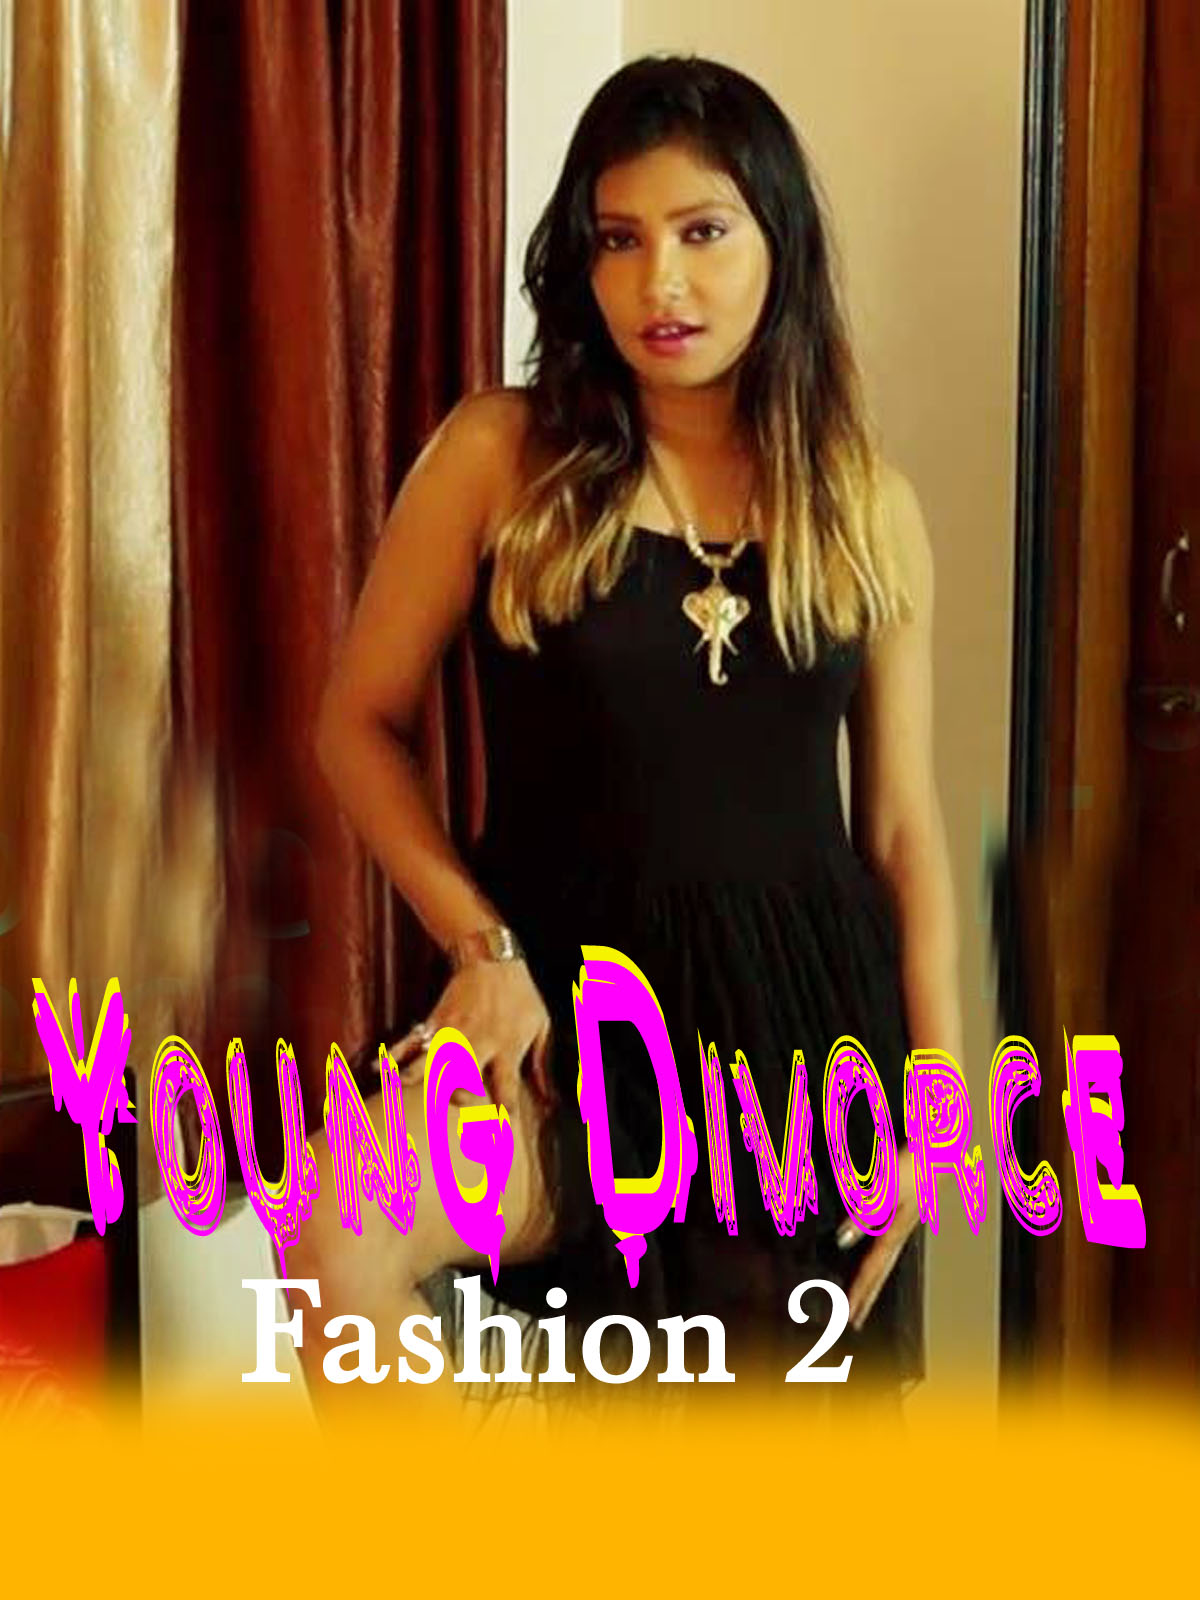 Young Divorce Fashion 2 (2020) Hindi Hot Video | iEntertainment Exclusive | x264 WEB-DL | 720p | 480p | Download | Watch Online